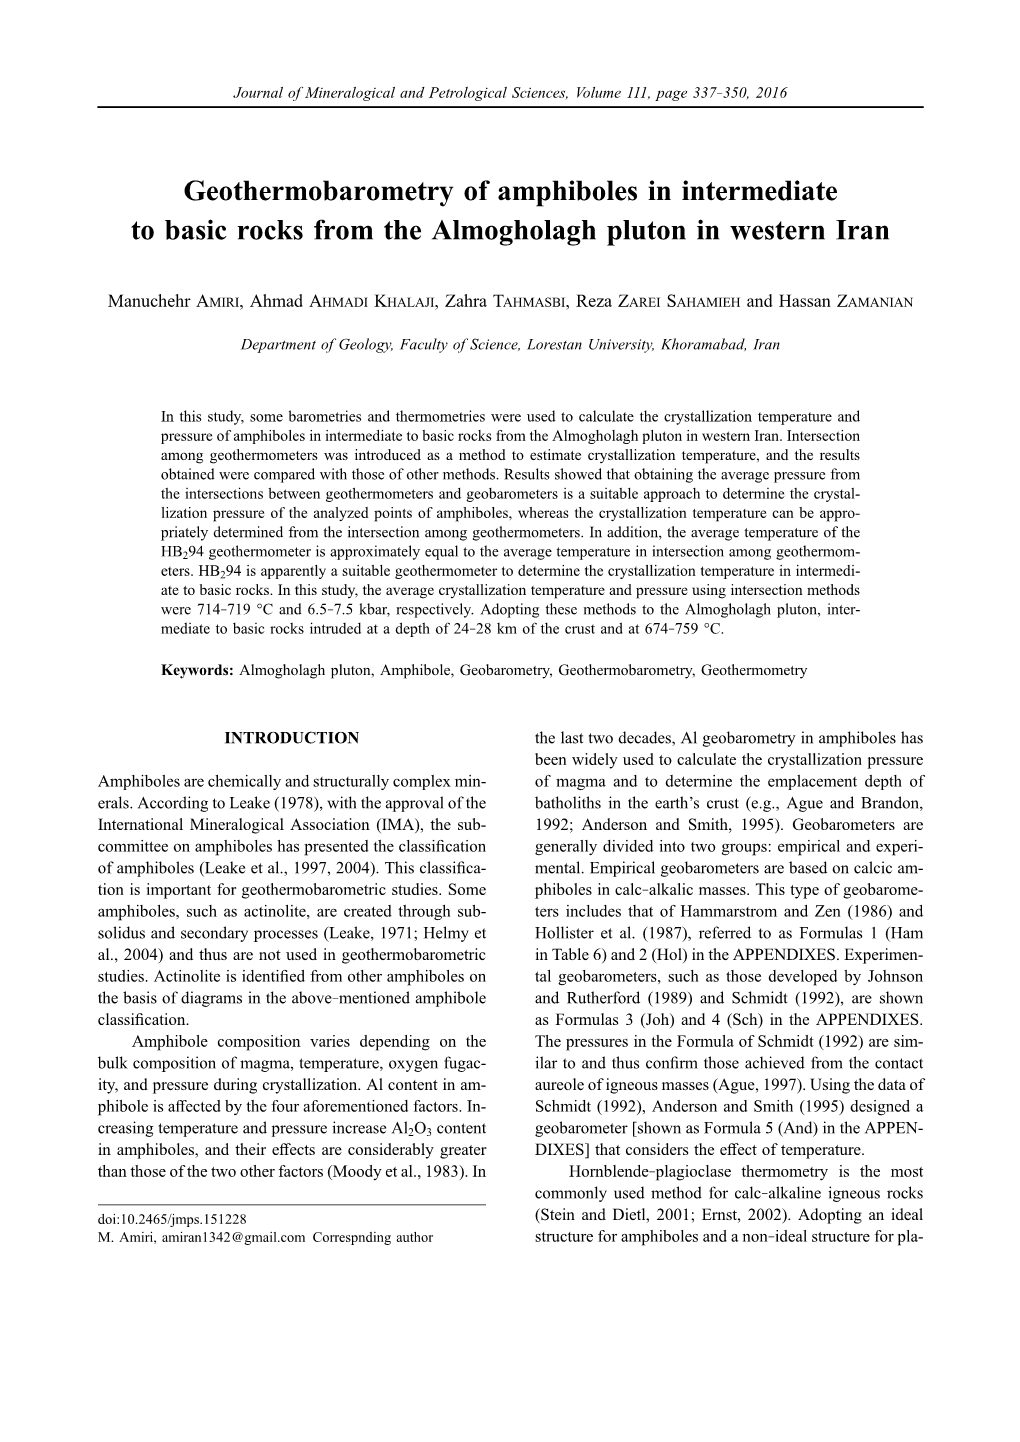 Geothermobarometry of Amphiboles in Intermediate to Basic Rocks from the Almogholagh Pluton in Western Iran